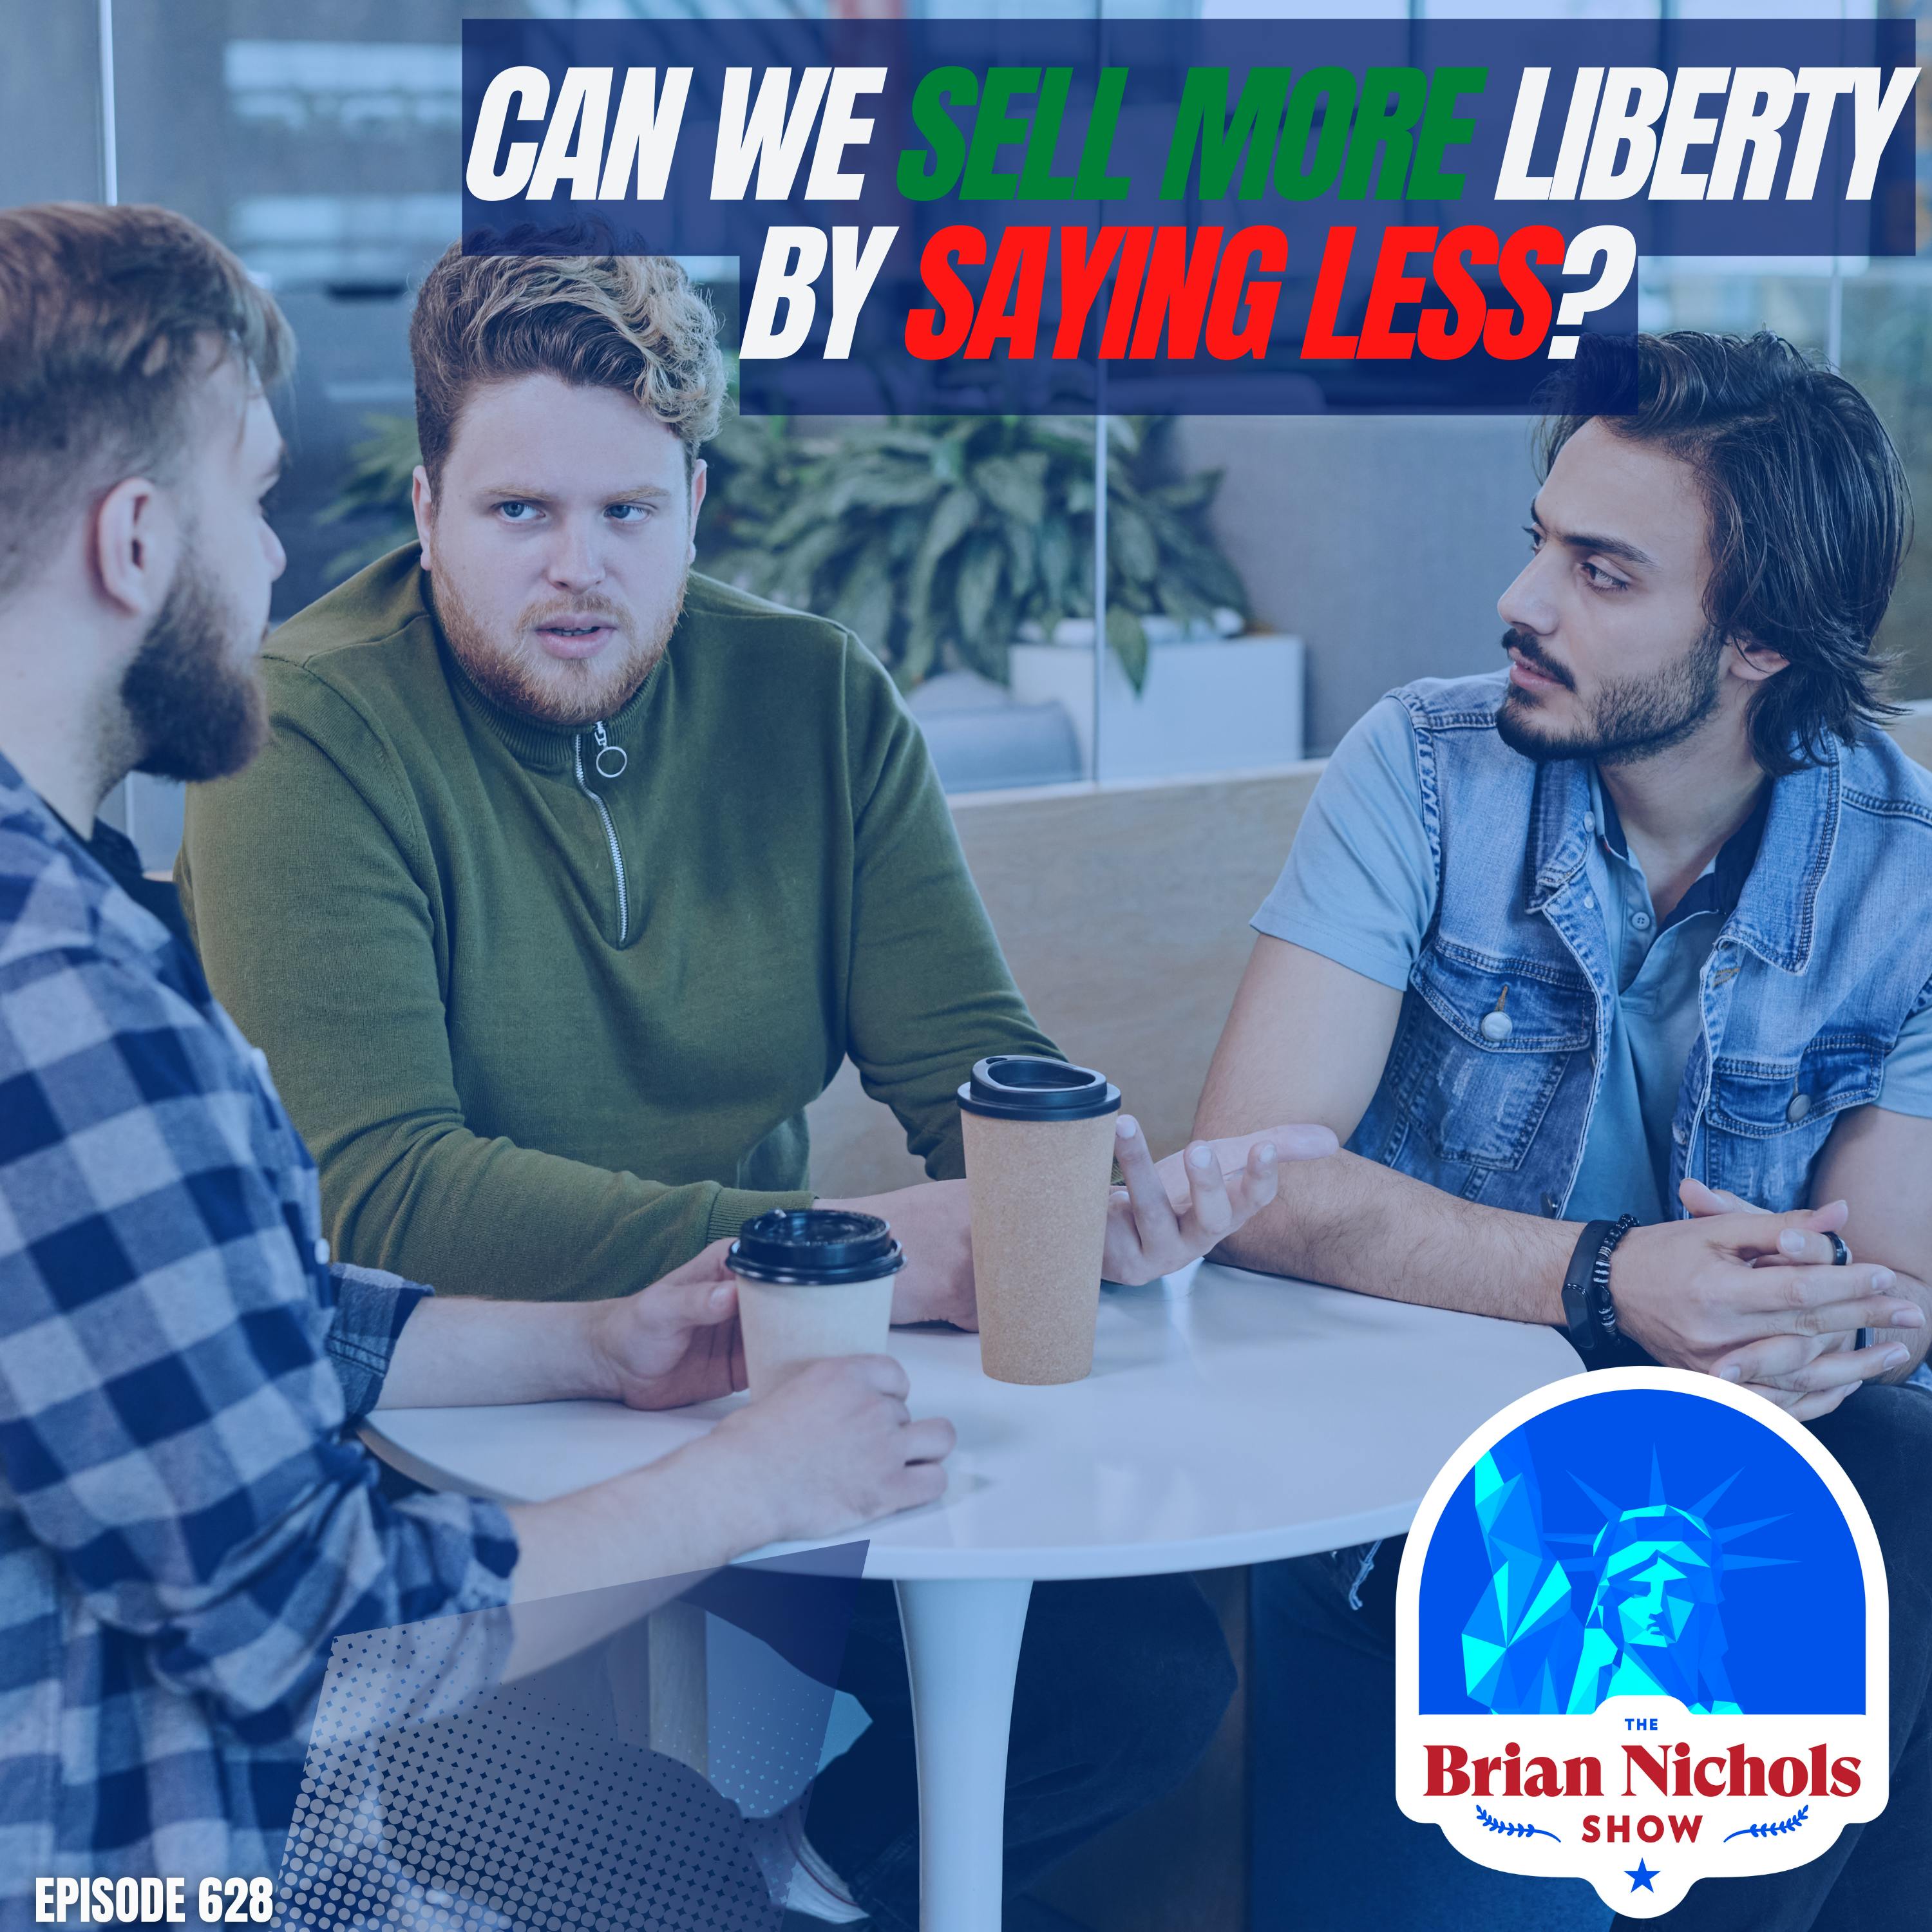 Episode image for 628: Can We Sell More Liberty By Saying Less?